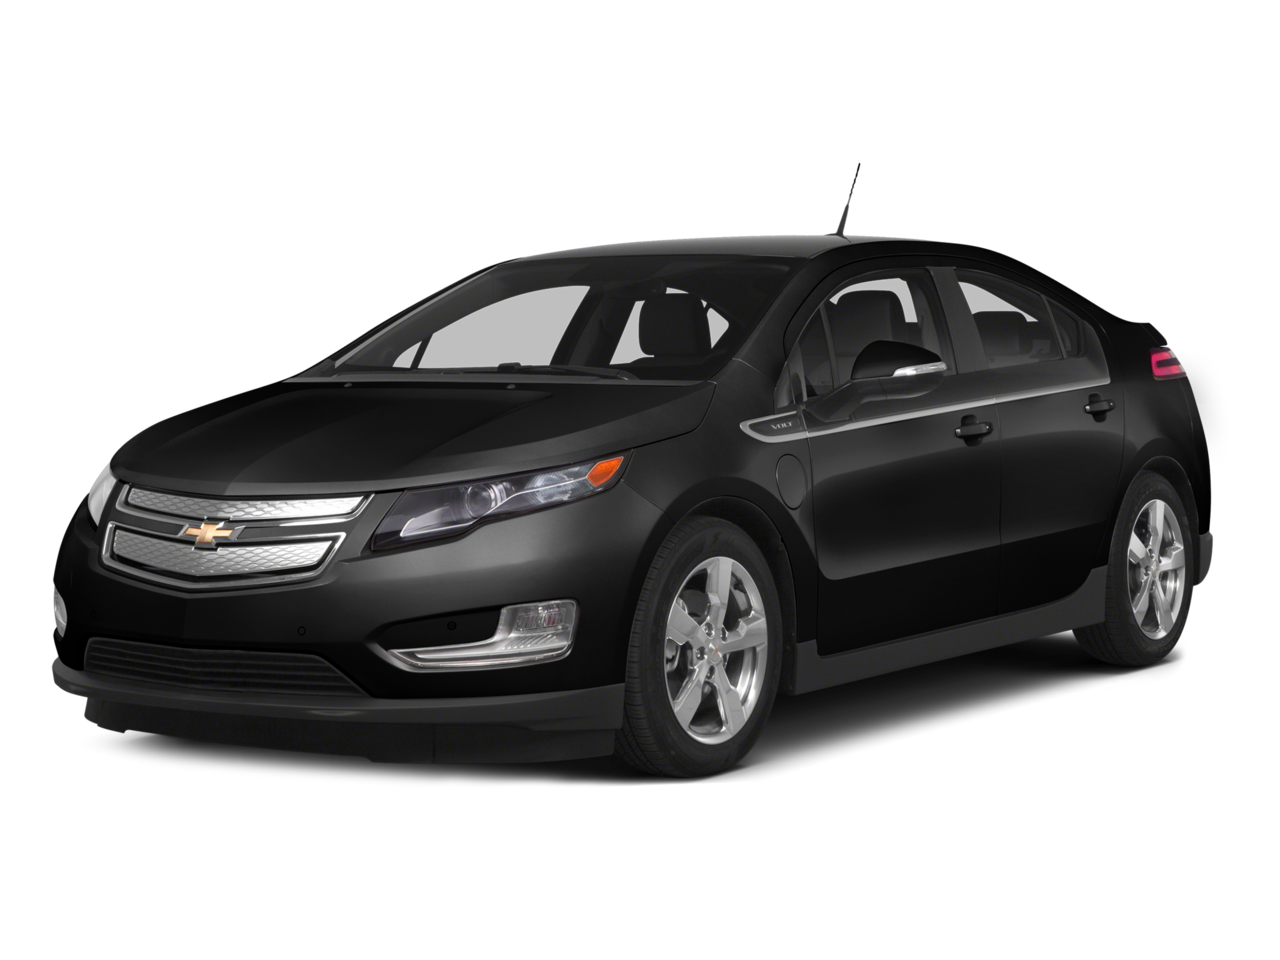 2015 Chevrolet Volt Repair: Service and Maintenance Cost